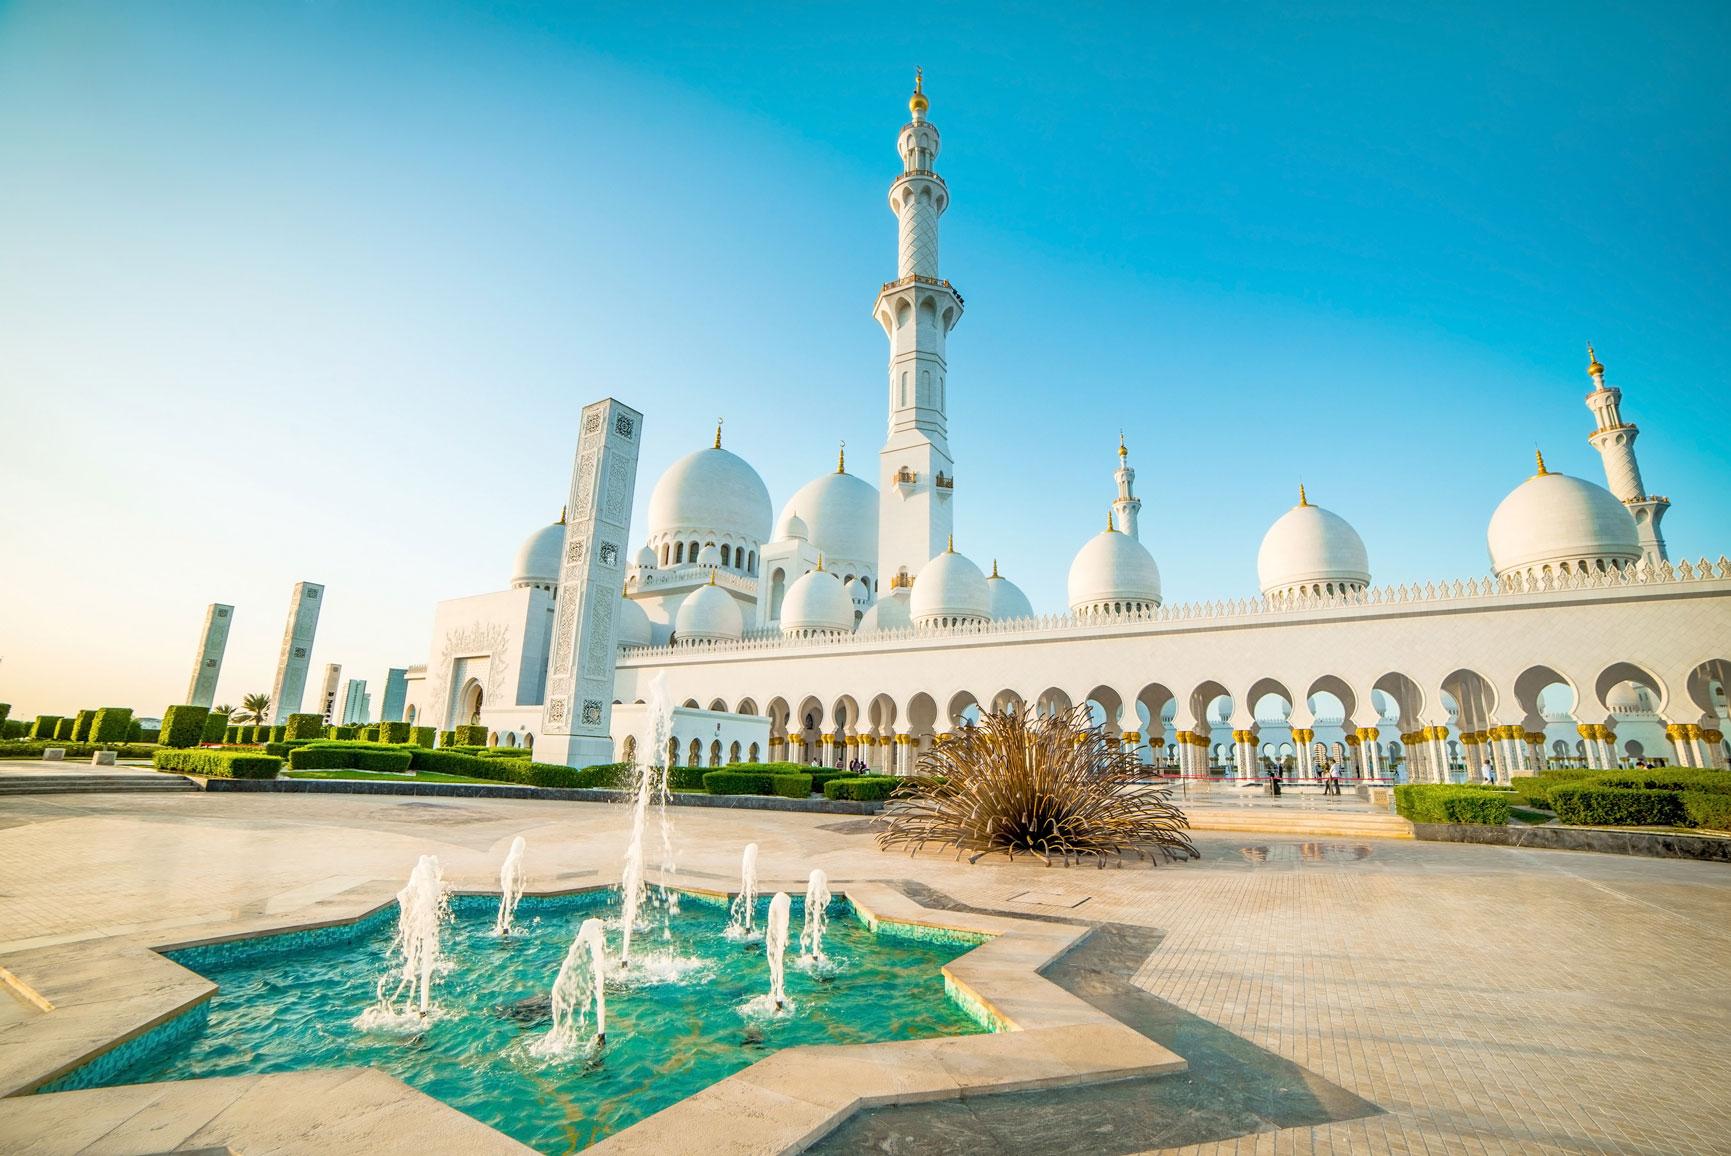 Experience monuments like the Sheik Zayed Grand Mosque with Middle East vacation packages